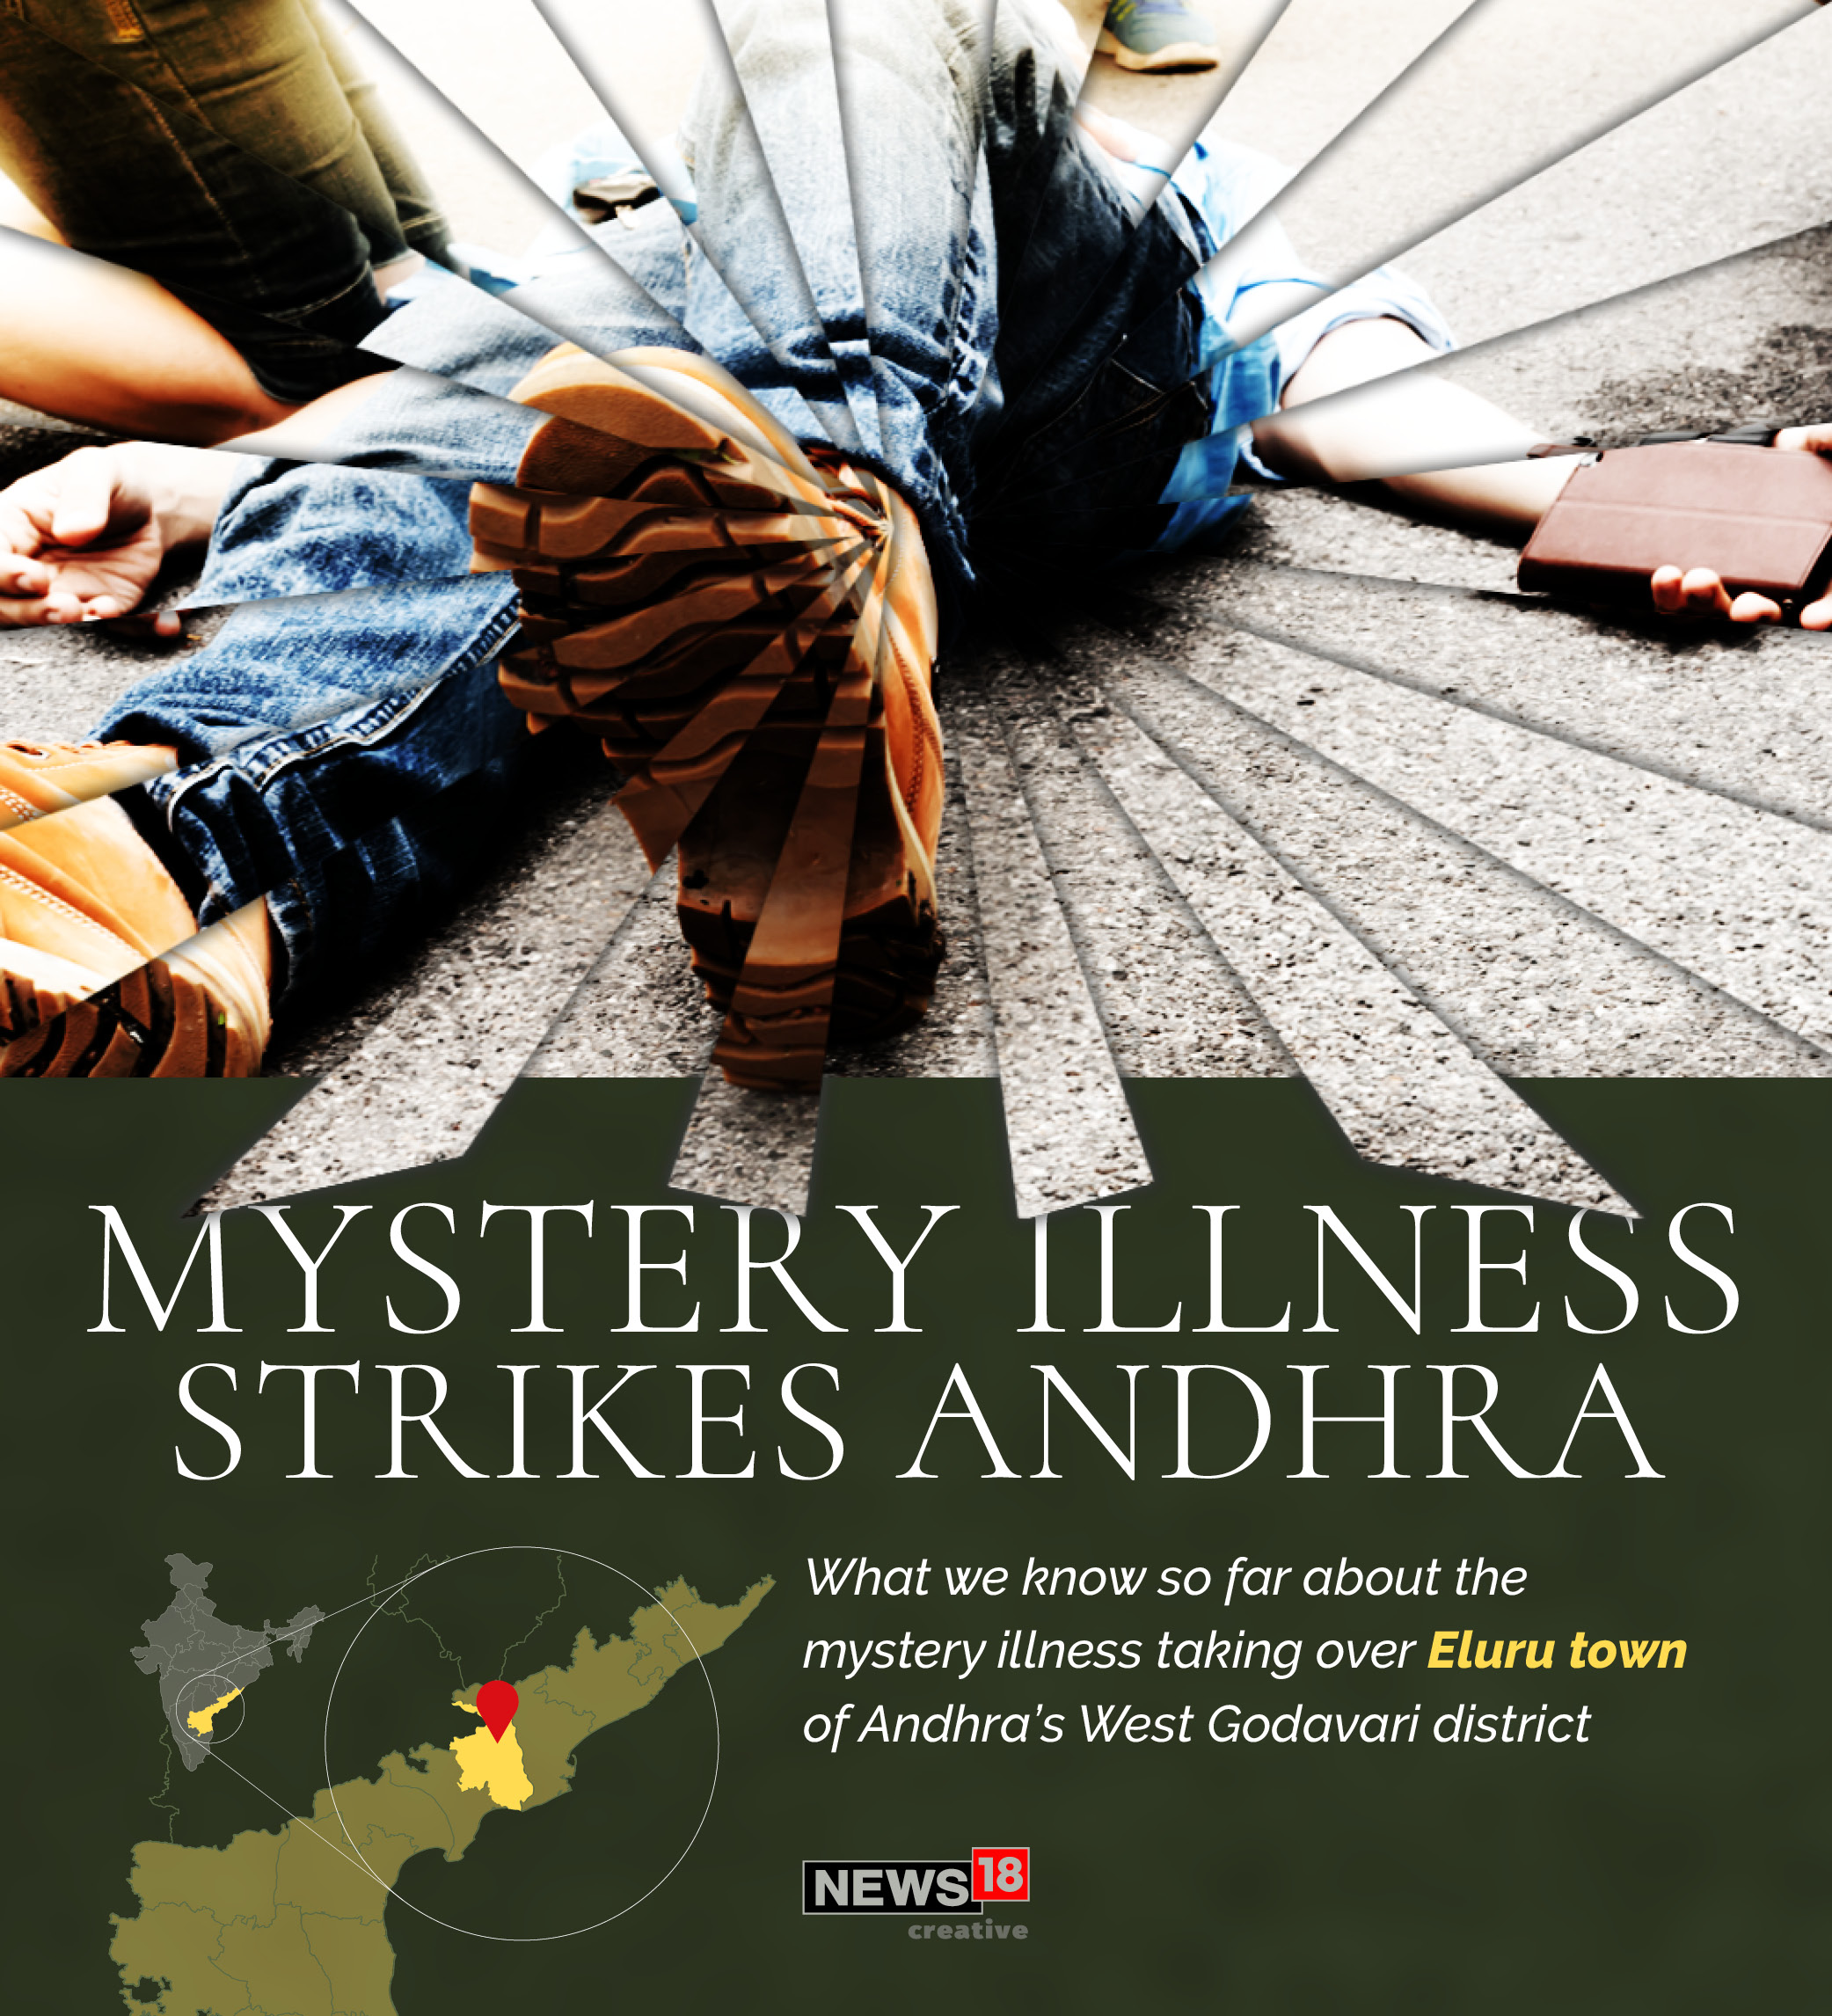 A mysterious illness strikes Andhra: What we know so far